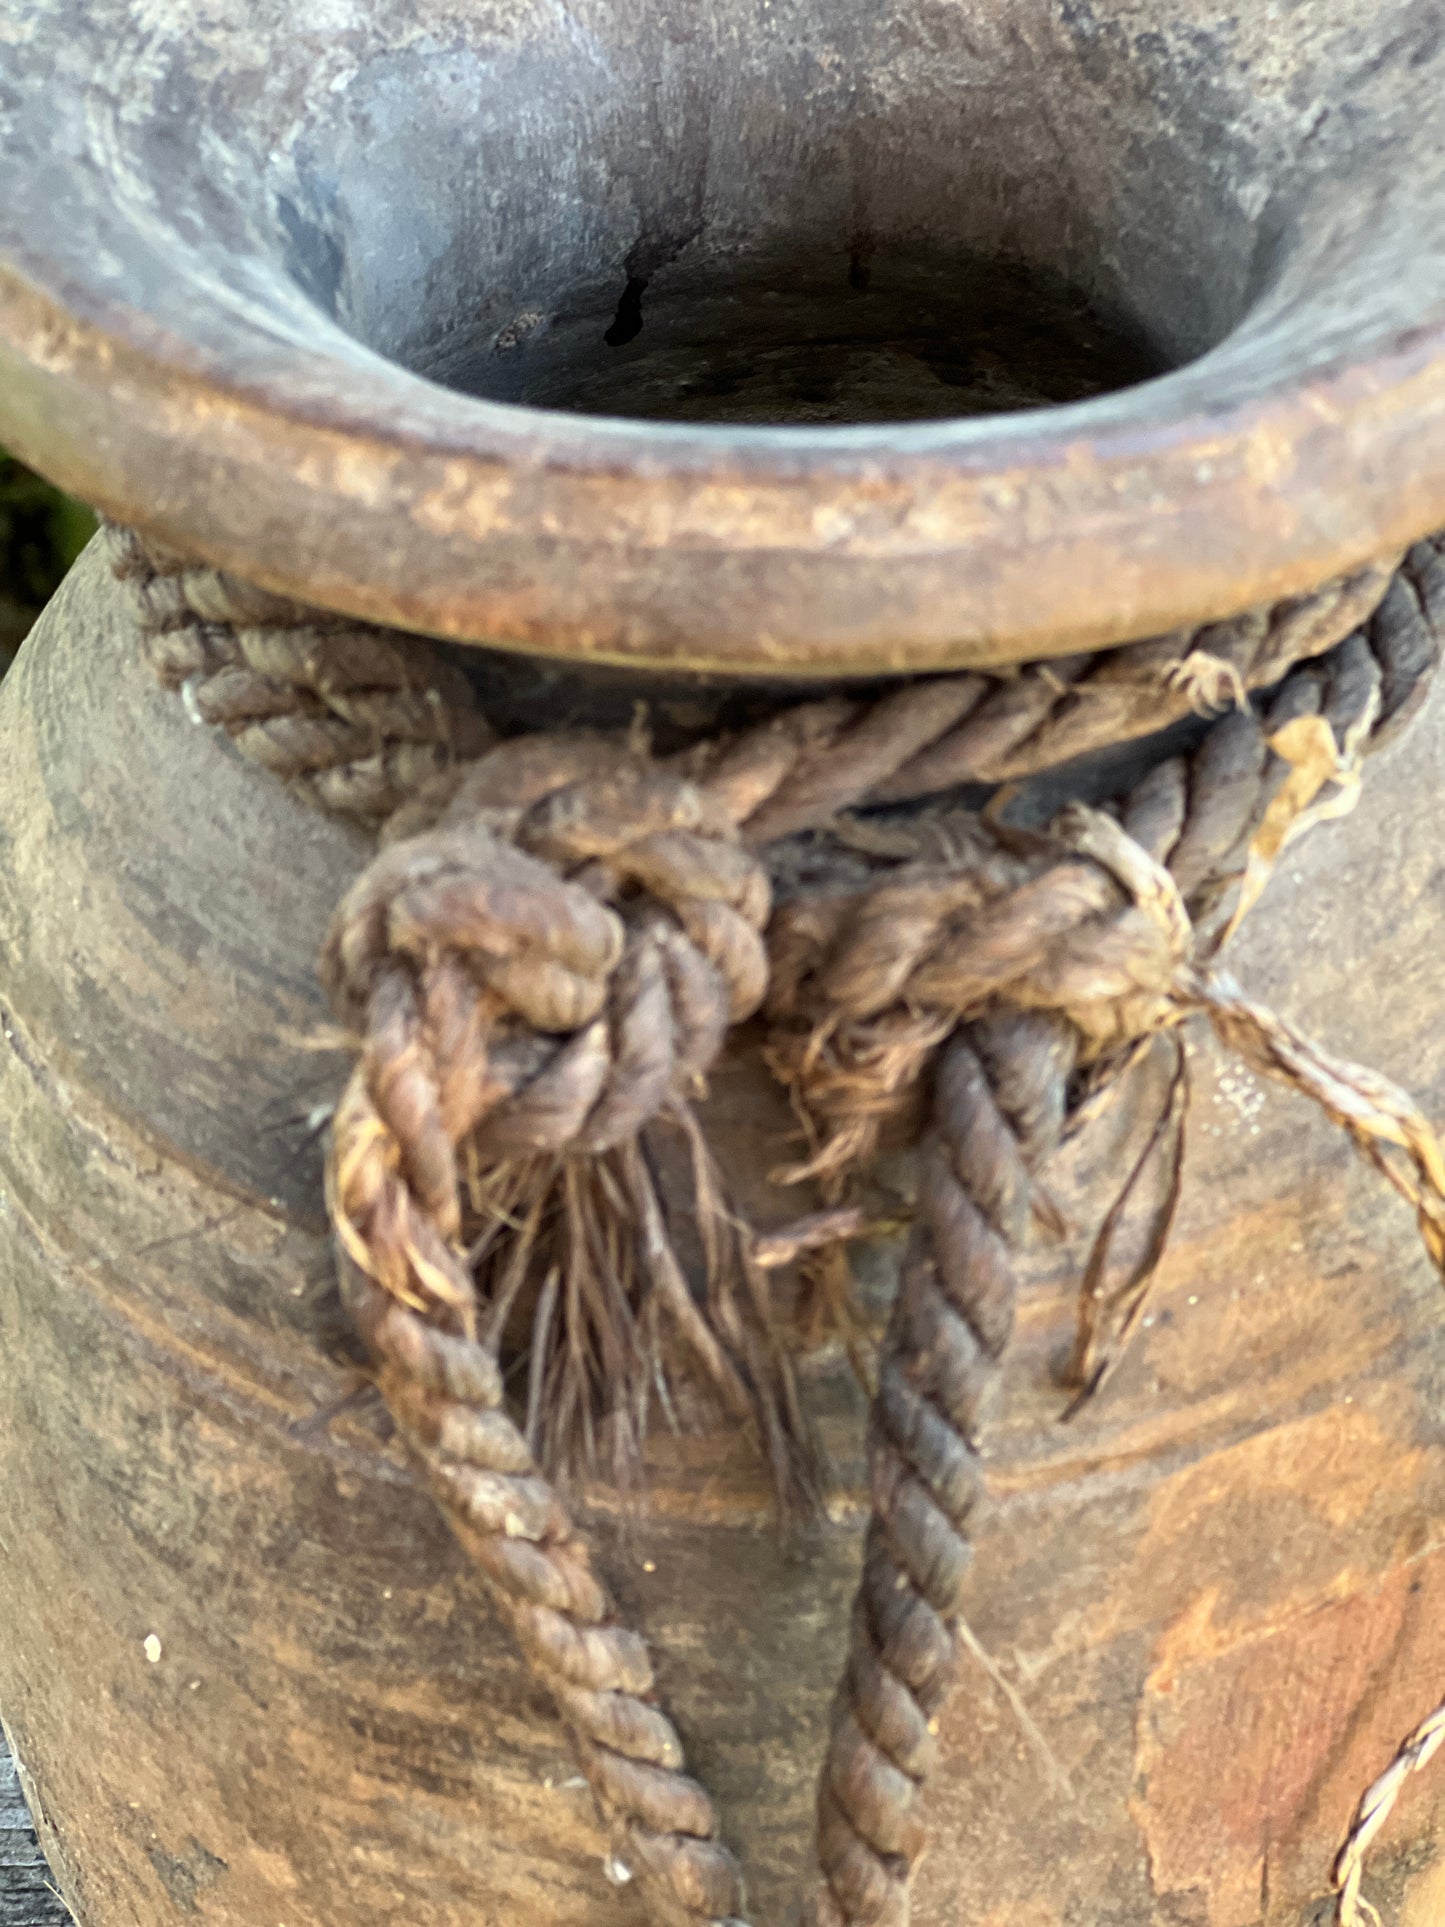 Old nepalese pot (6)